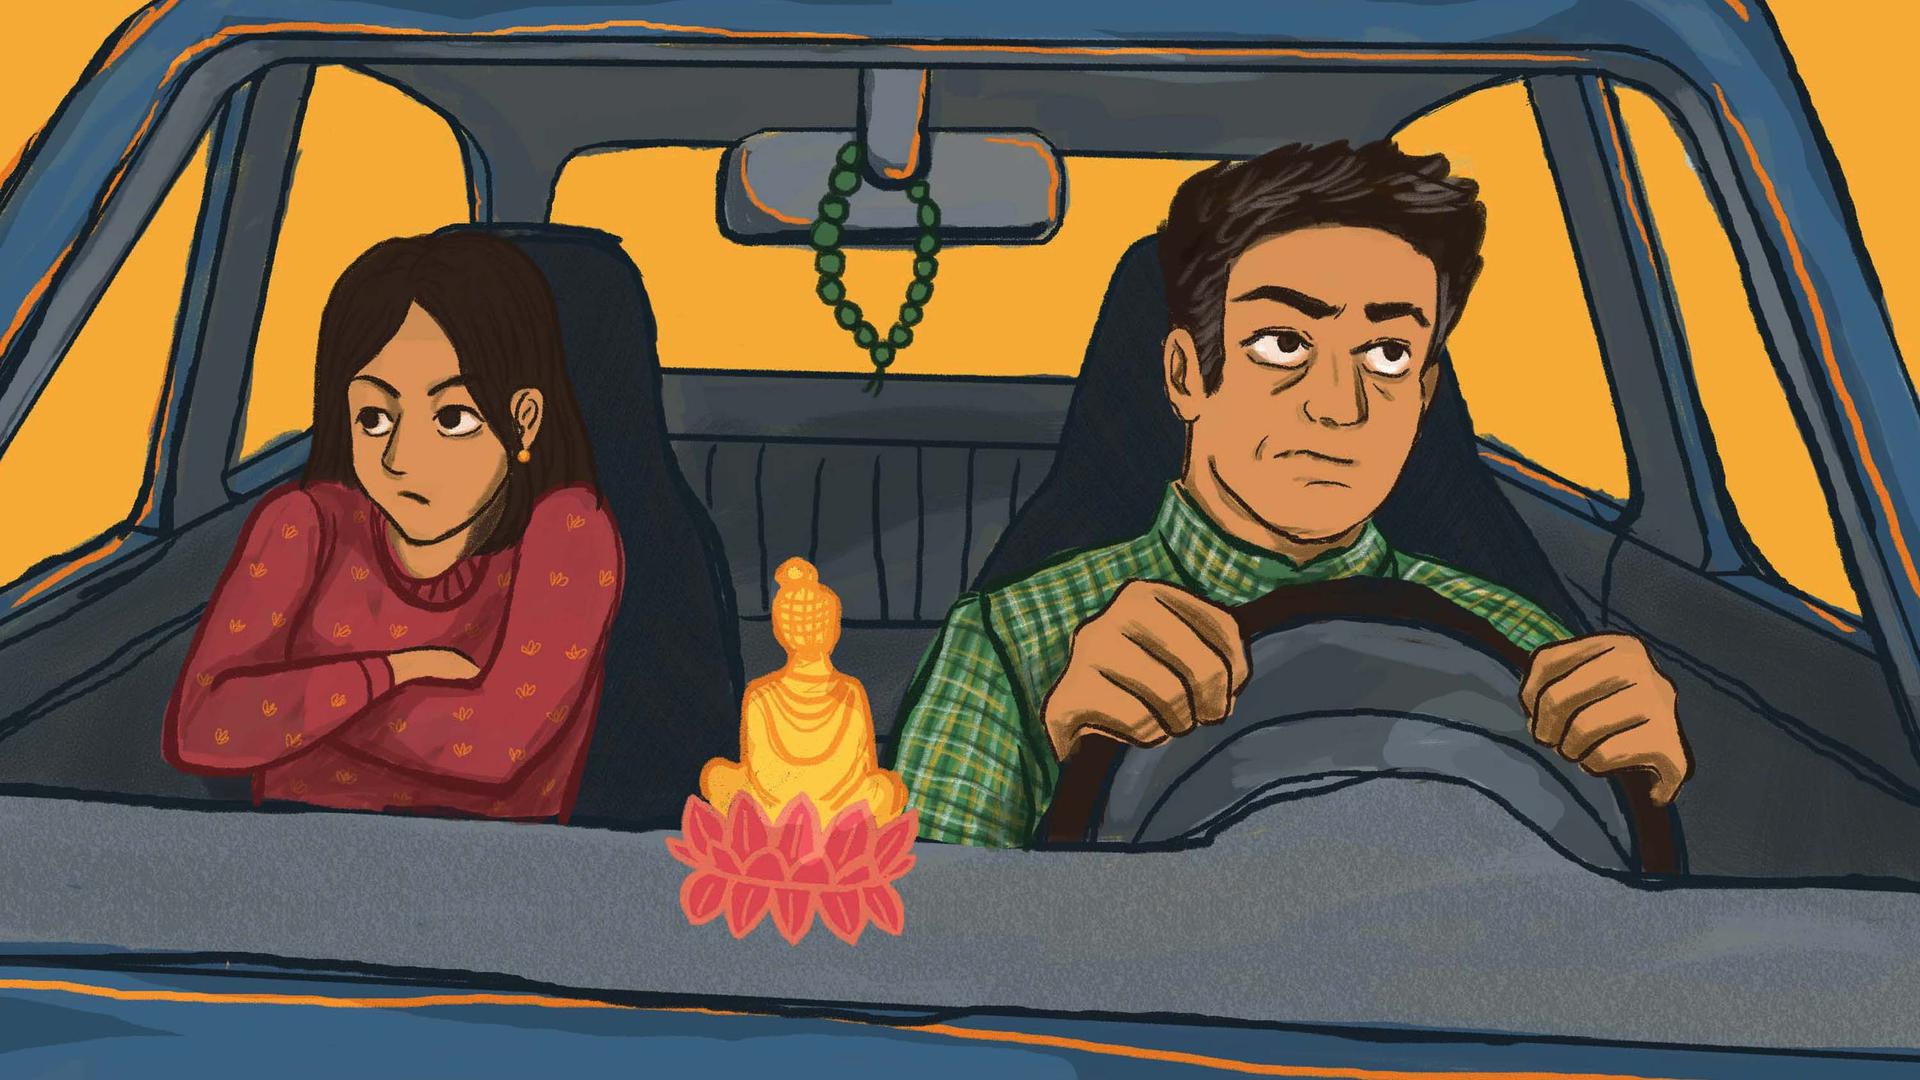 Illustration of young woman sitting in car, arms folded in despondent pose, while older man is driving, with prayer beads hanging from rearview mirror and Buddha figurine on dash